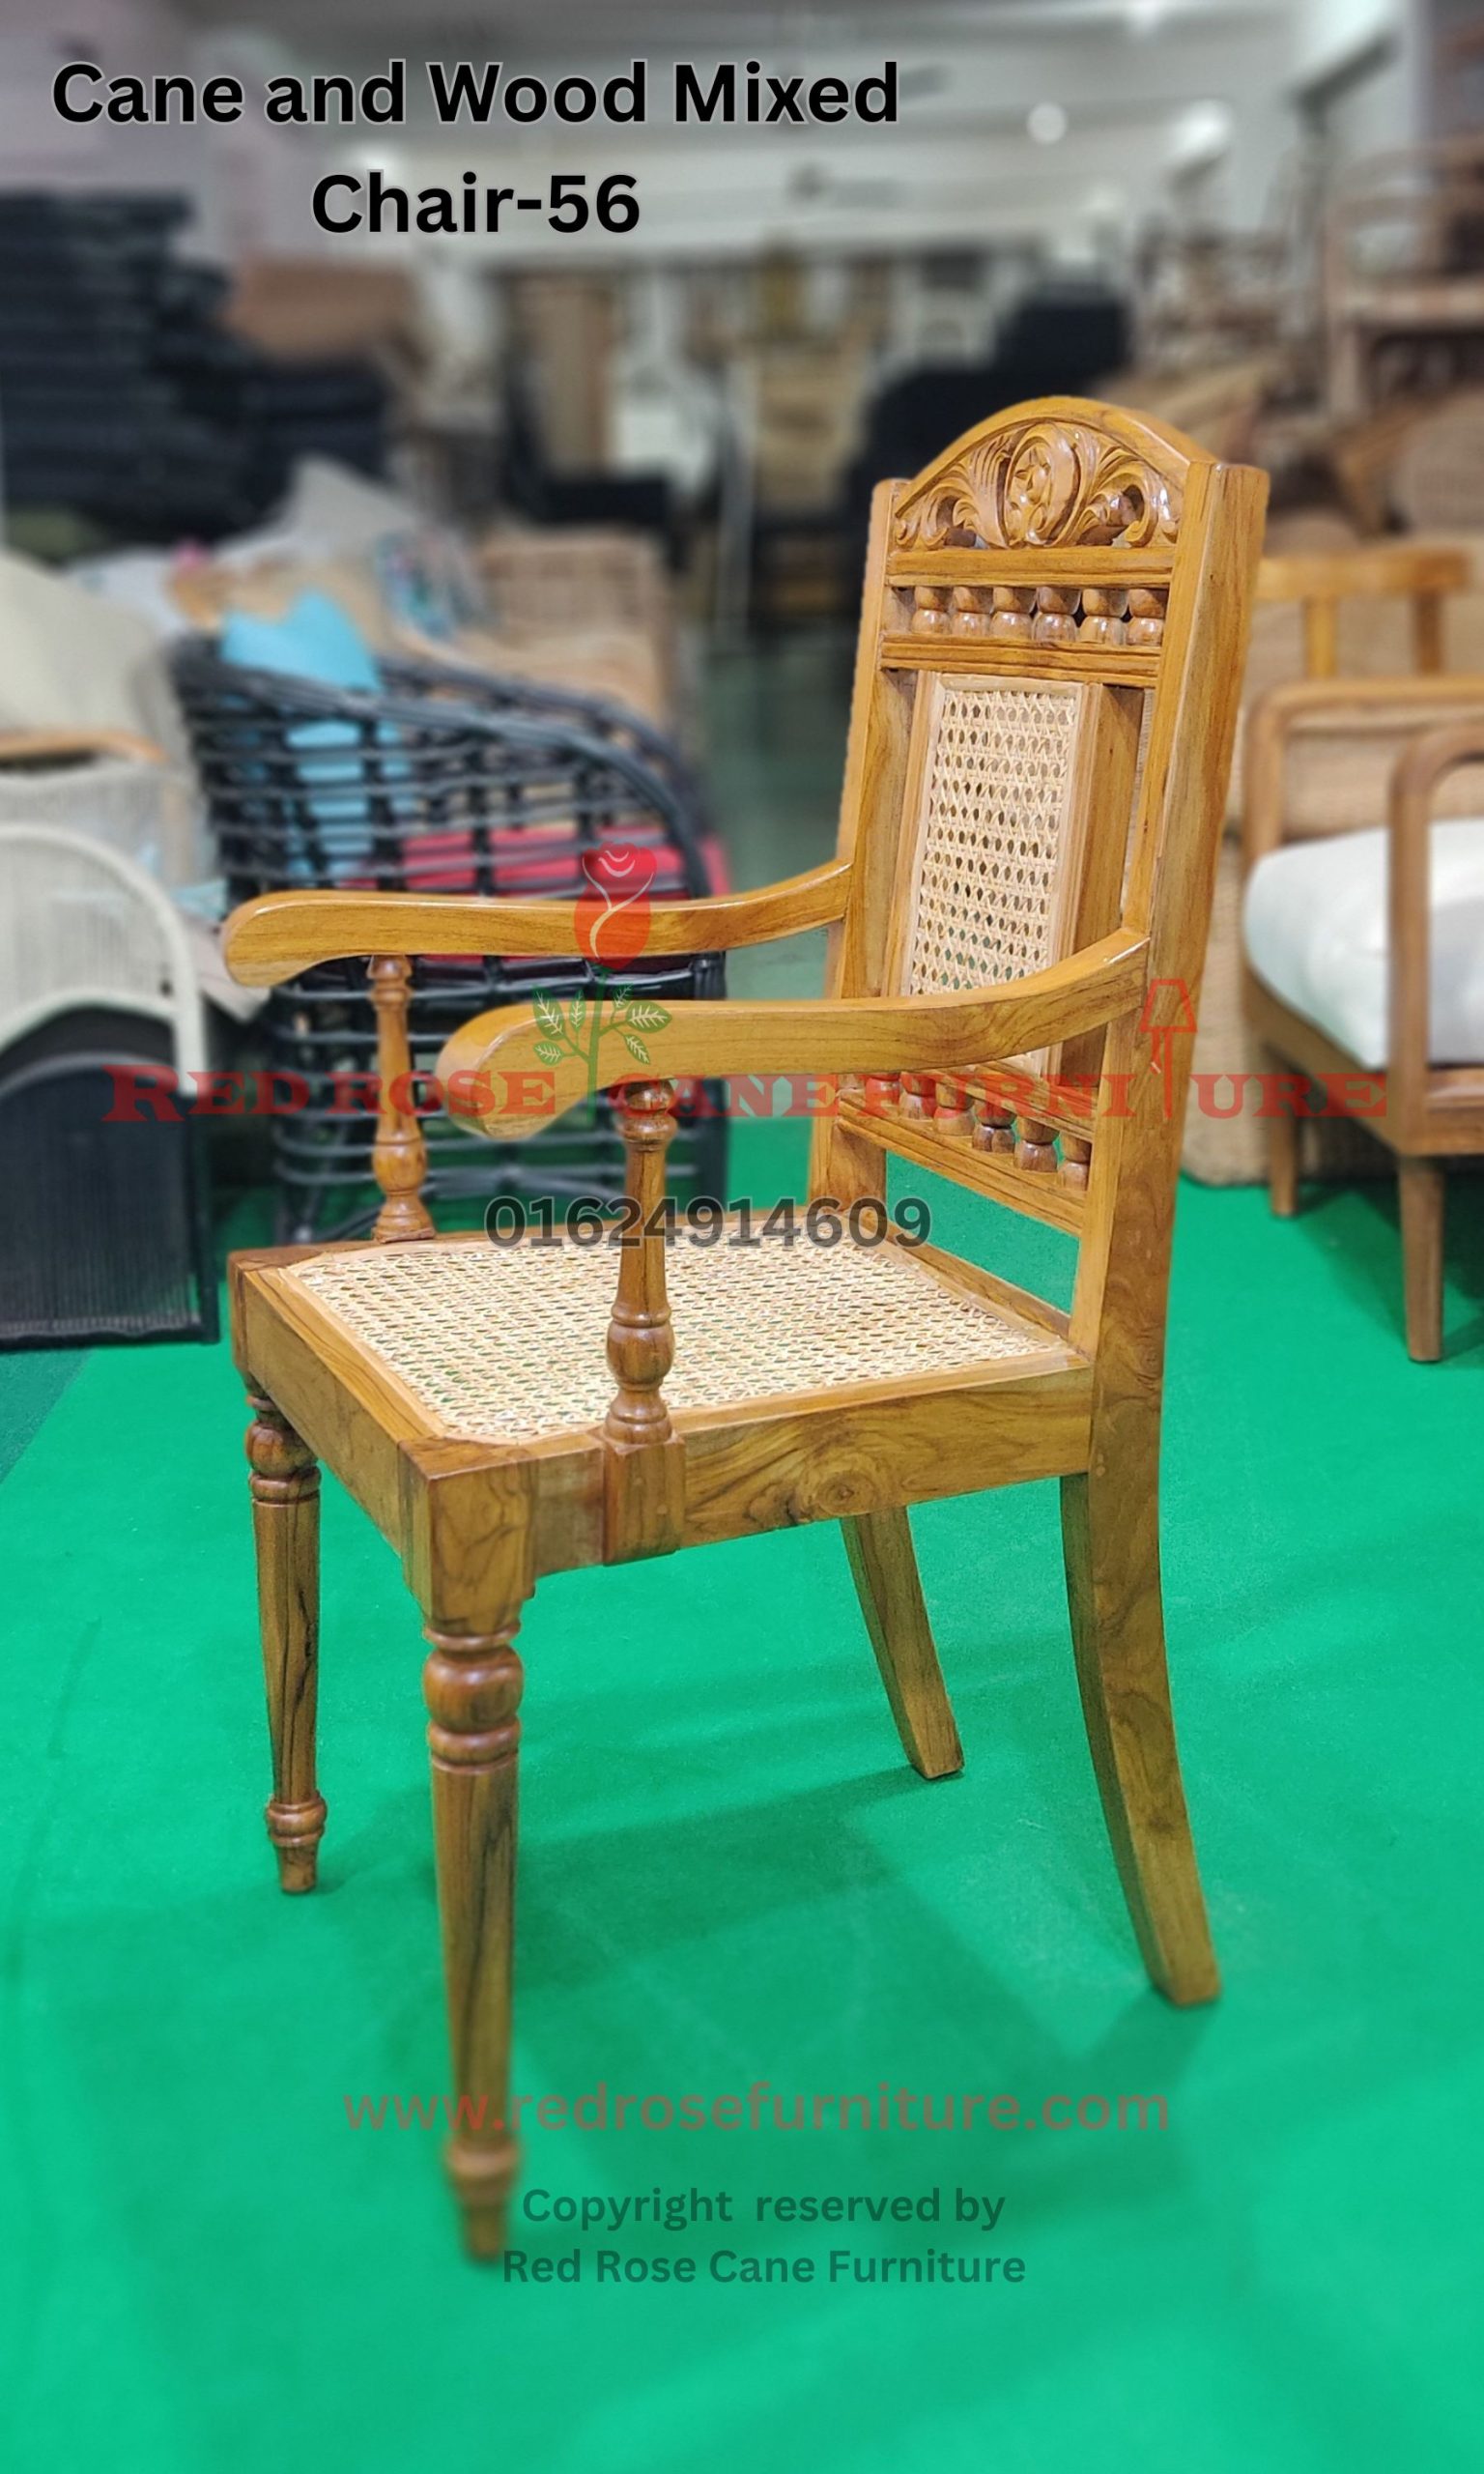 Cane and Wood Mixed Chair-56